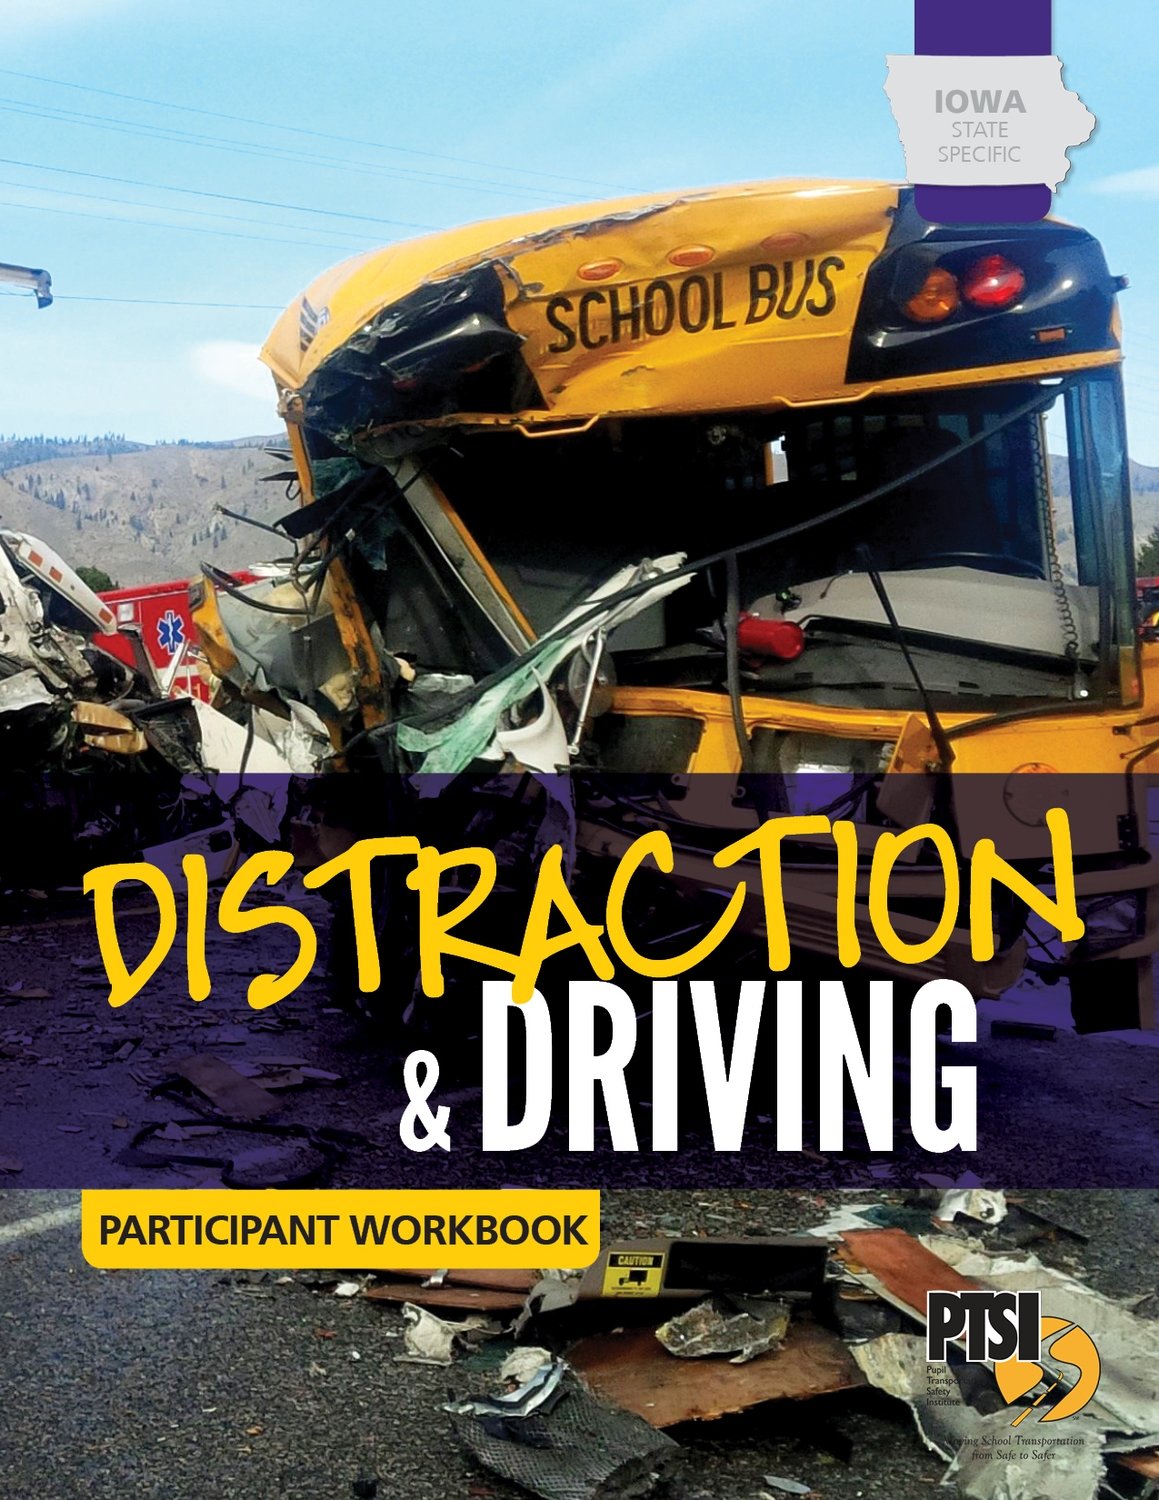 Iowa State Specific Distraction & Driving WORKBOOK